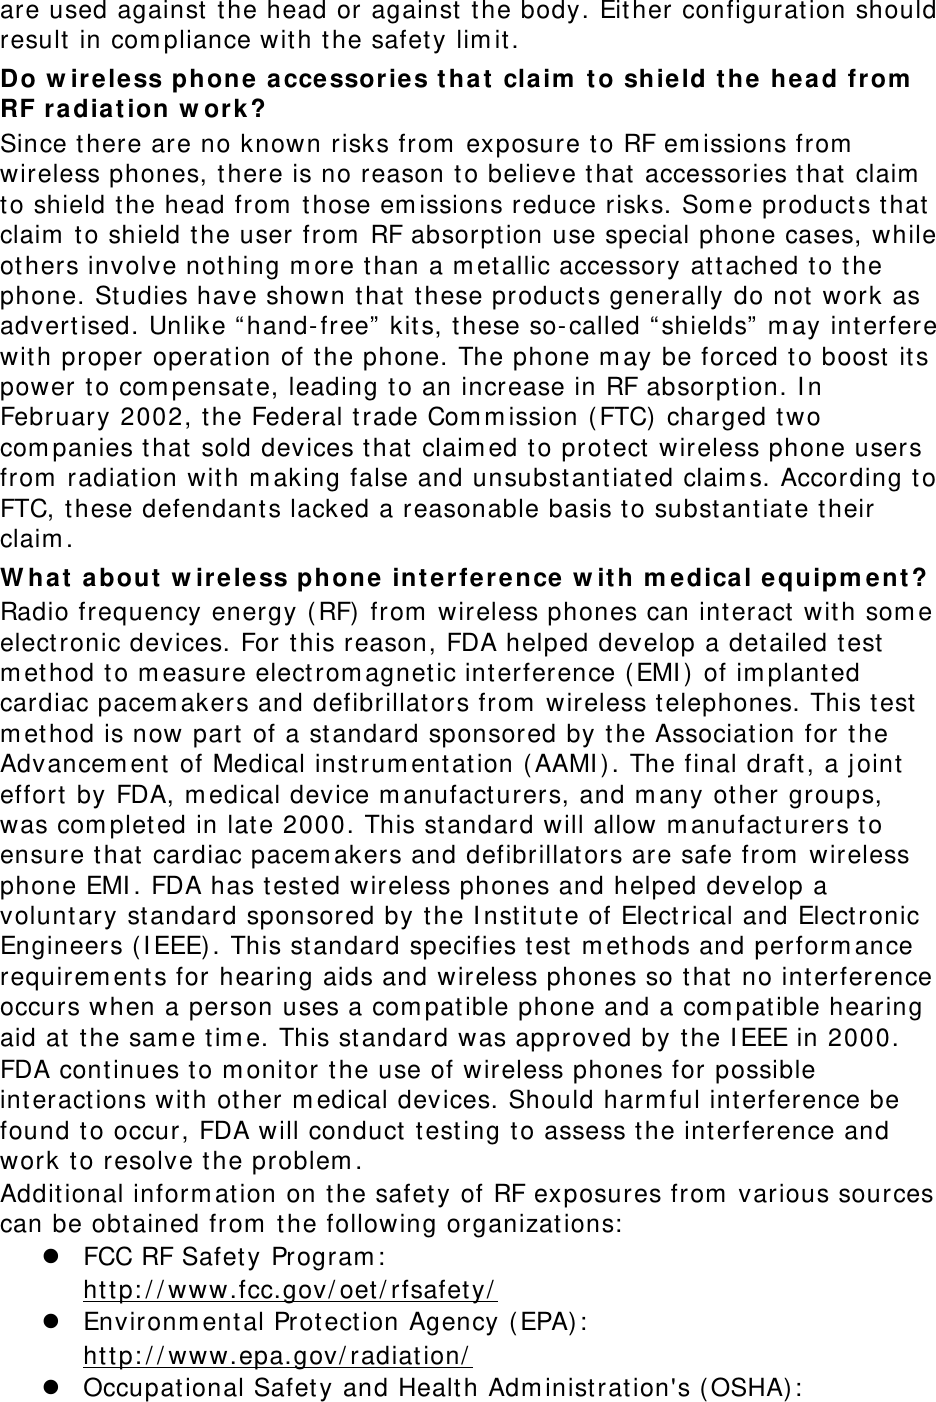 are used against  t he head or against  the body. Eit her configurat ion should result in com pliance with t he safet y lim it . Do w ireless phone acce ssories t ha t  claim  t o shie ld the head from  RF radiat ion w ork? Since there are no known risks from  exposure t o RF em issions from  wireless phones, there is no reason to believe that accessories that  claim  to shield the head from  t hose em issions reduce risks. Som e products t hat  claim  to shield t he user from  RF absorpt ion use special phone cases, while others involve nothing m ore t han a m et allic accessory attached to the phone. Studies have shown t hat these product s generally do not work as advert ised. Unlike “hand- free”  kits, t hese so- called “shields”  m ay int erfere wit h proper operation of t he phone. The phone m ay be forced to boost  it s power to com pensat e, leading to an increase in RF absorption. I n February 2002, t he Federal trade Com m ission (FTC) charged t wo com panies t hat sold devices t hat claim ed to protect  wireless phone users from  radiation with m aking false and unsubstantiat ed claim s. According t o FTC, these defendants lacked a reasonable basis to subst ant iate t heir claim . W hat a bout  w ireless phone inter ference  w it h  m edical equipm ent ? Radio frequency energy ( RF) from  wireless phones can int eract  with som e elect ronic devices. For this reason, FDA helped develop a det ailed t est  m et hod t o m easure elect rom agnet ic int erference (EMI )  of im plant ed cardiac pacem akers and defibrillators from  wireless t elephones. This test m et hod is now part  of a standard sponsored by the Associat ion for t he Advancem ent  of Medical inst rum entat ion (AAMI ) . The final draft , a j oint  effort  by FDA, m edical device m anufact urers, and m any ot her groups, was com pleted in late 2000. This st andard will allow m anufacturers t o ensure that  cardiac pacem akers and defibrillat ors are safe from  wireless phone EMI . FDA has tested wireless phones and helped develop a volunt ary st andard sponsored by t he I nst itute of Elect rical and Elect ronic Engineers ( I EEE). This st andard specifies t est  m ethods and perform ance requirem ents for hearing aids and wireless phones so that no int erference occurs when a person uses a com patible phone and a com patible hearing aid at t he sam e tim e. This standard was approved by t he I EEE in 2000. FDA continues to m onitor the use of wireless phones for possible interact ions with ot her m edical devices. Should harm ful int erference be found to occur, FDA will conduct  testing t o assess t he interference and work to resolve the problem . Addit ional inform ation on the safet y of RF exposures from  various sources can be obtained from  the following organizat ions:  z FCC RF Safet y Program :   ht tp: / / www.fcc.gov/ oet / rfsafety/  z Environm ental Prot ection Agency (EPA) :   ht tp: / / www.epa.gov/ radiat ion/  z Occupational Safet y and Health Adm inist ration&apos;s ( OSHA) :    